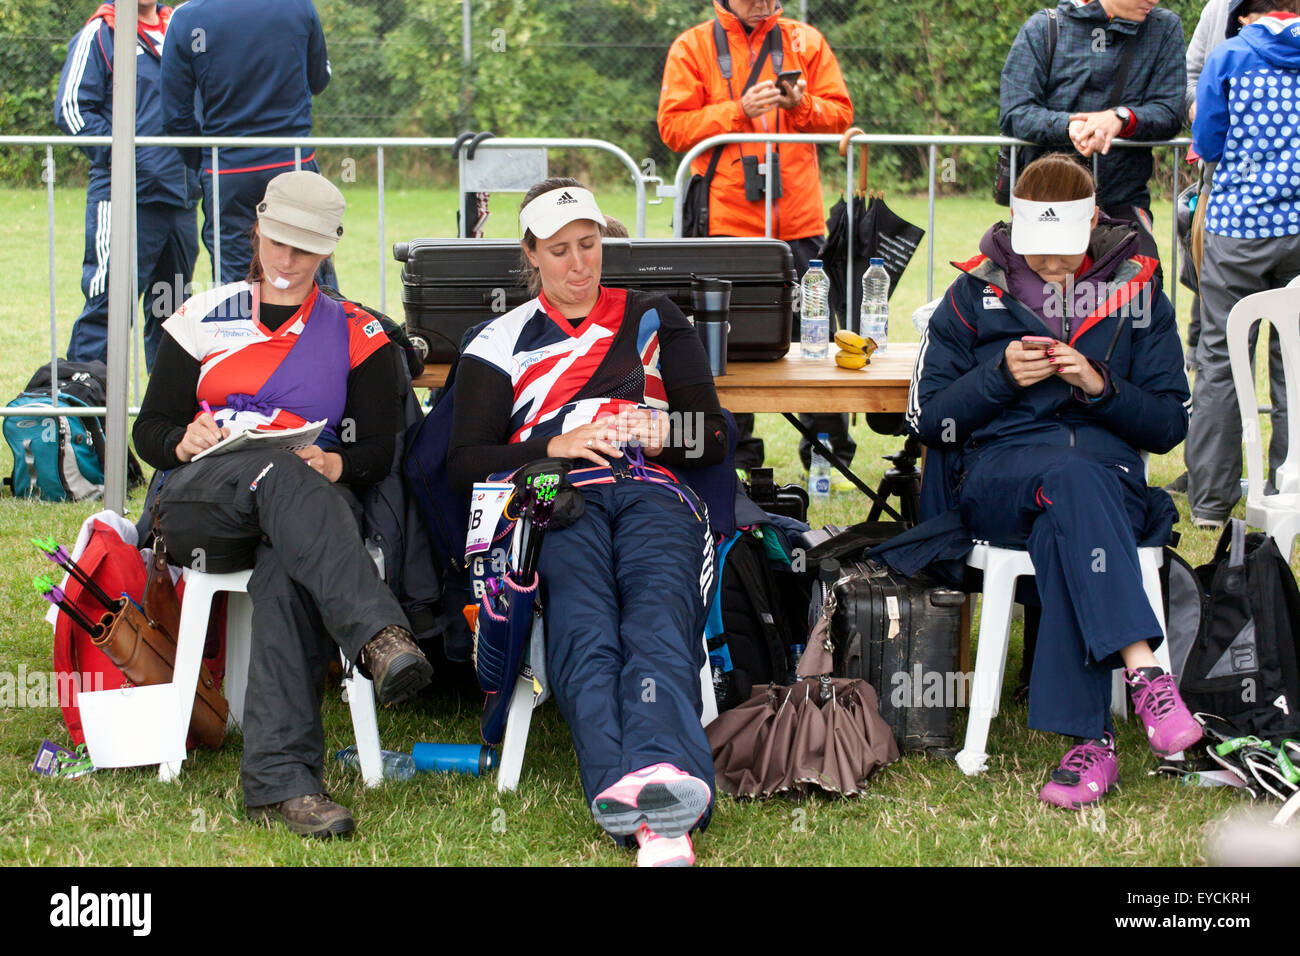 Copenhagen, Denmark, July 27th, 2015. UK archer team at the World Archery Championships in Copenhagen is rerlaxing before their shoos in the qualifying round Credit:  OJPHOTOS/Alamy Live News Stock Photo